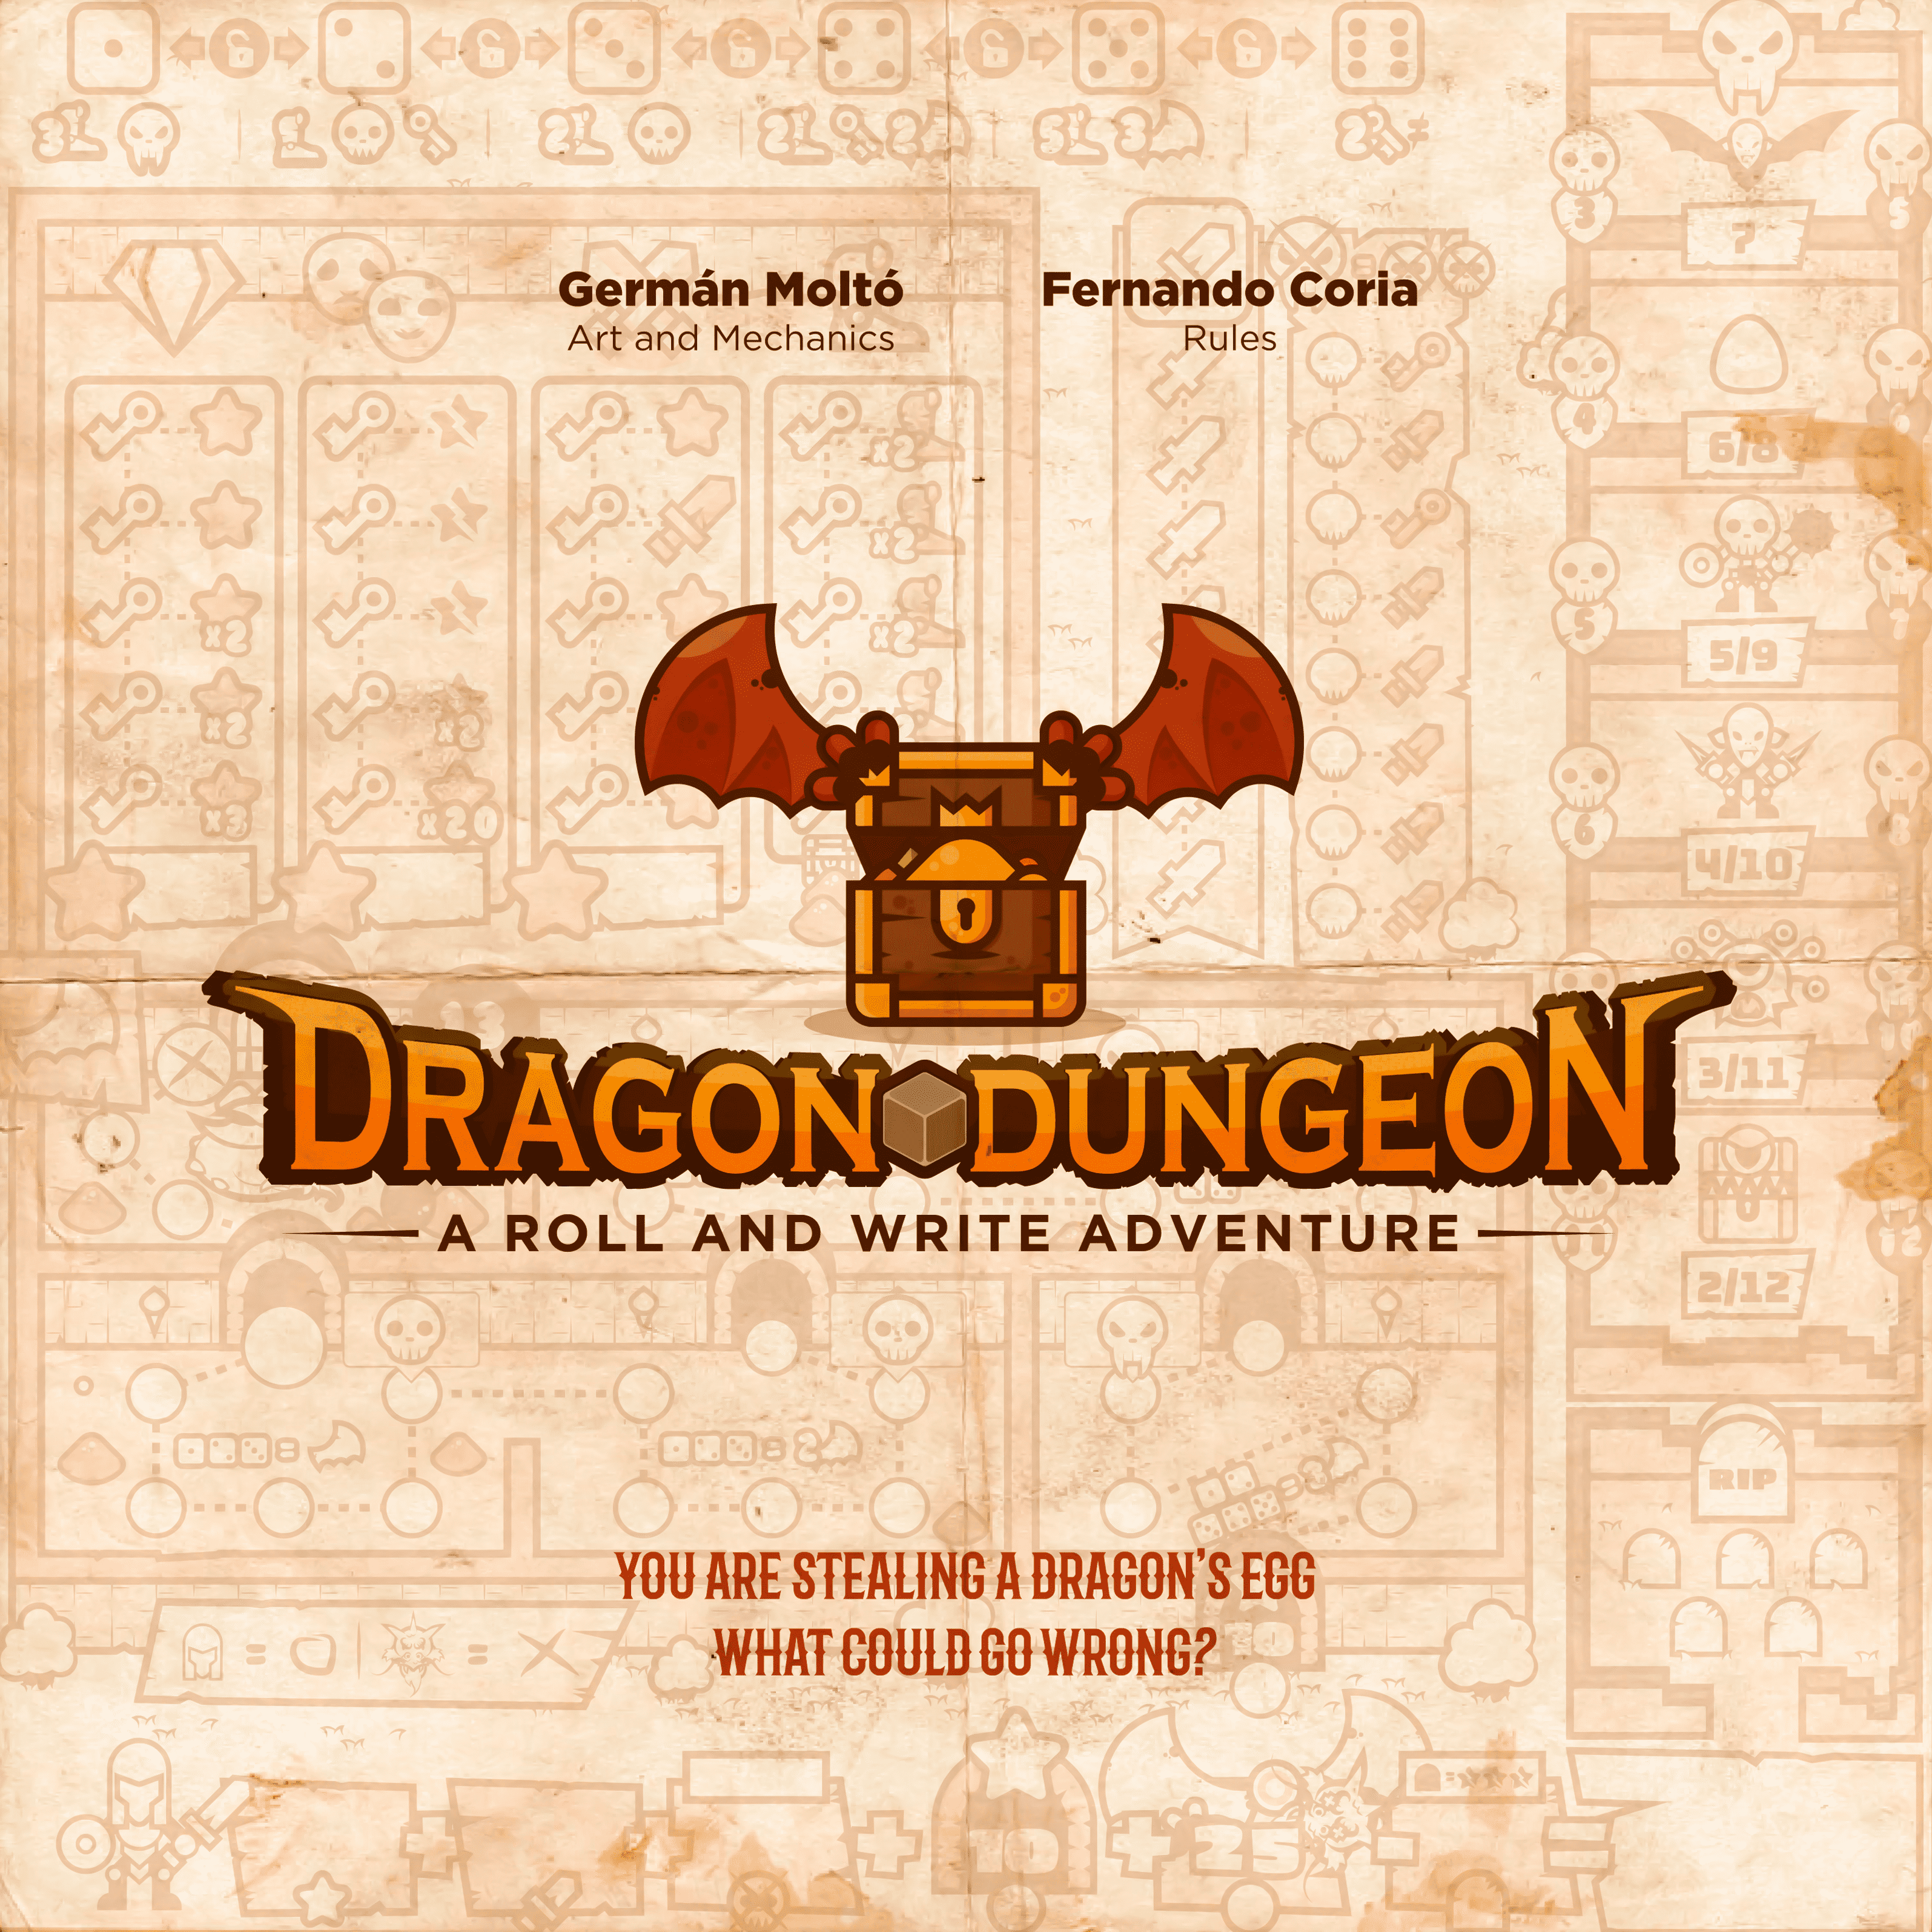 Dragon Dungeon: A roll and write adventure